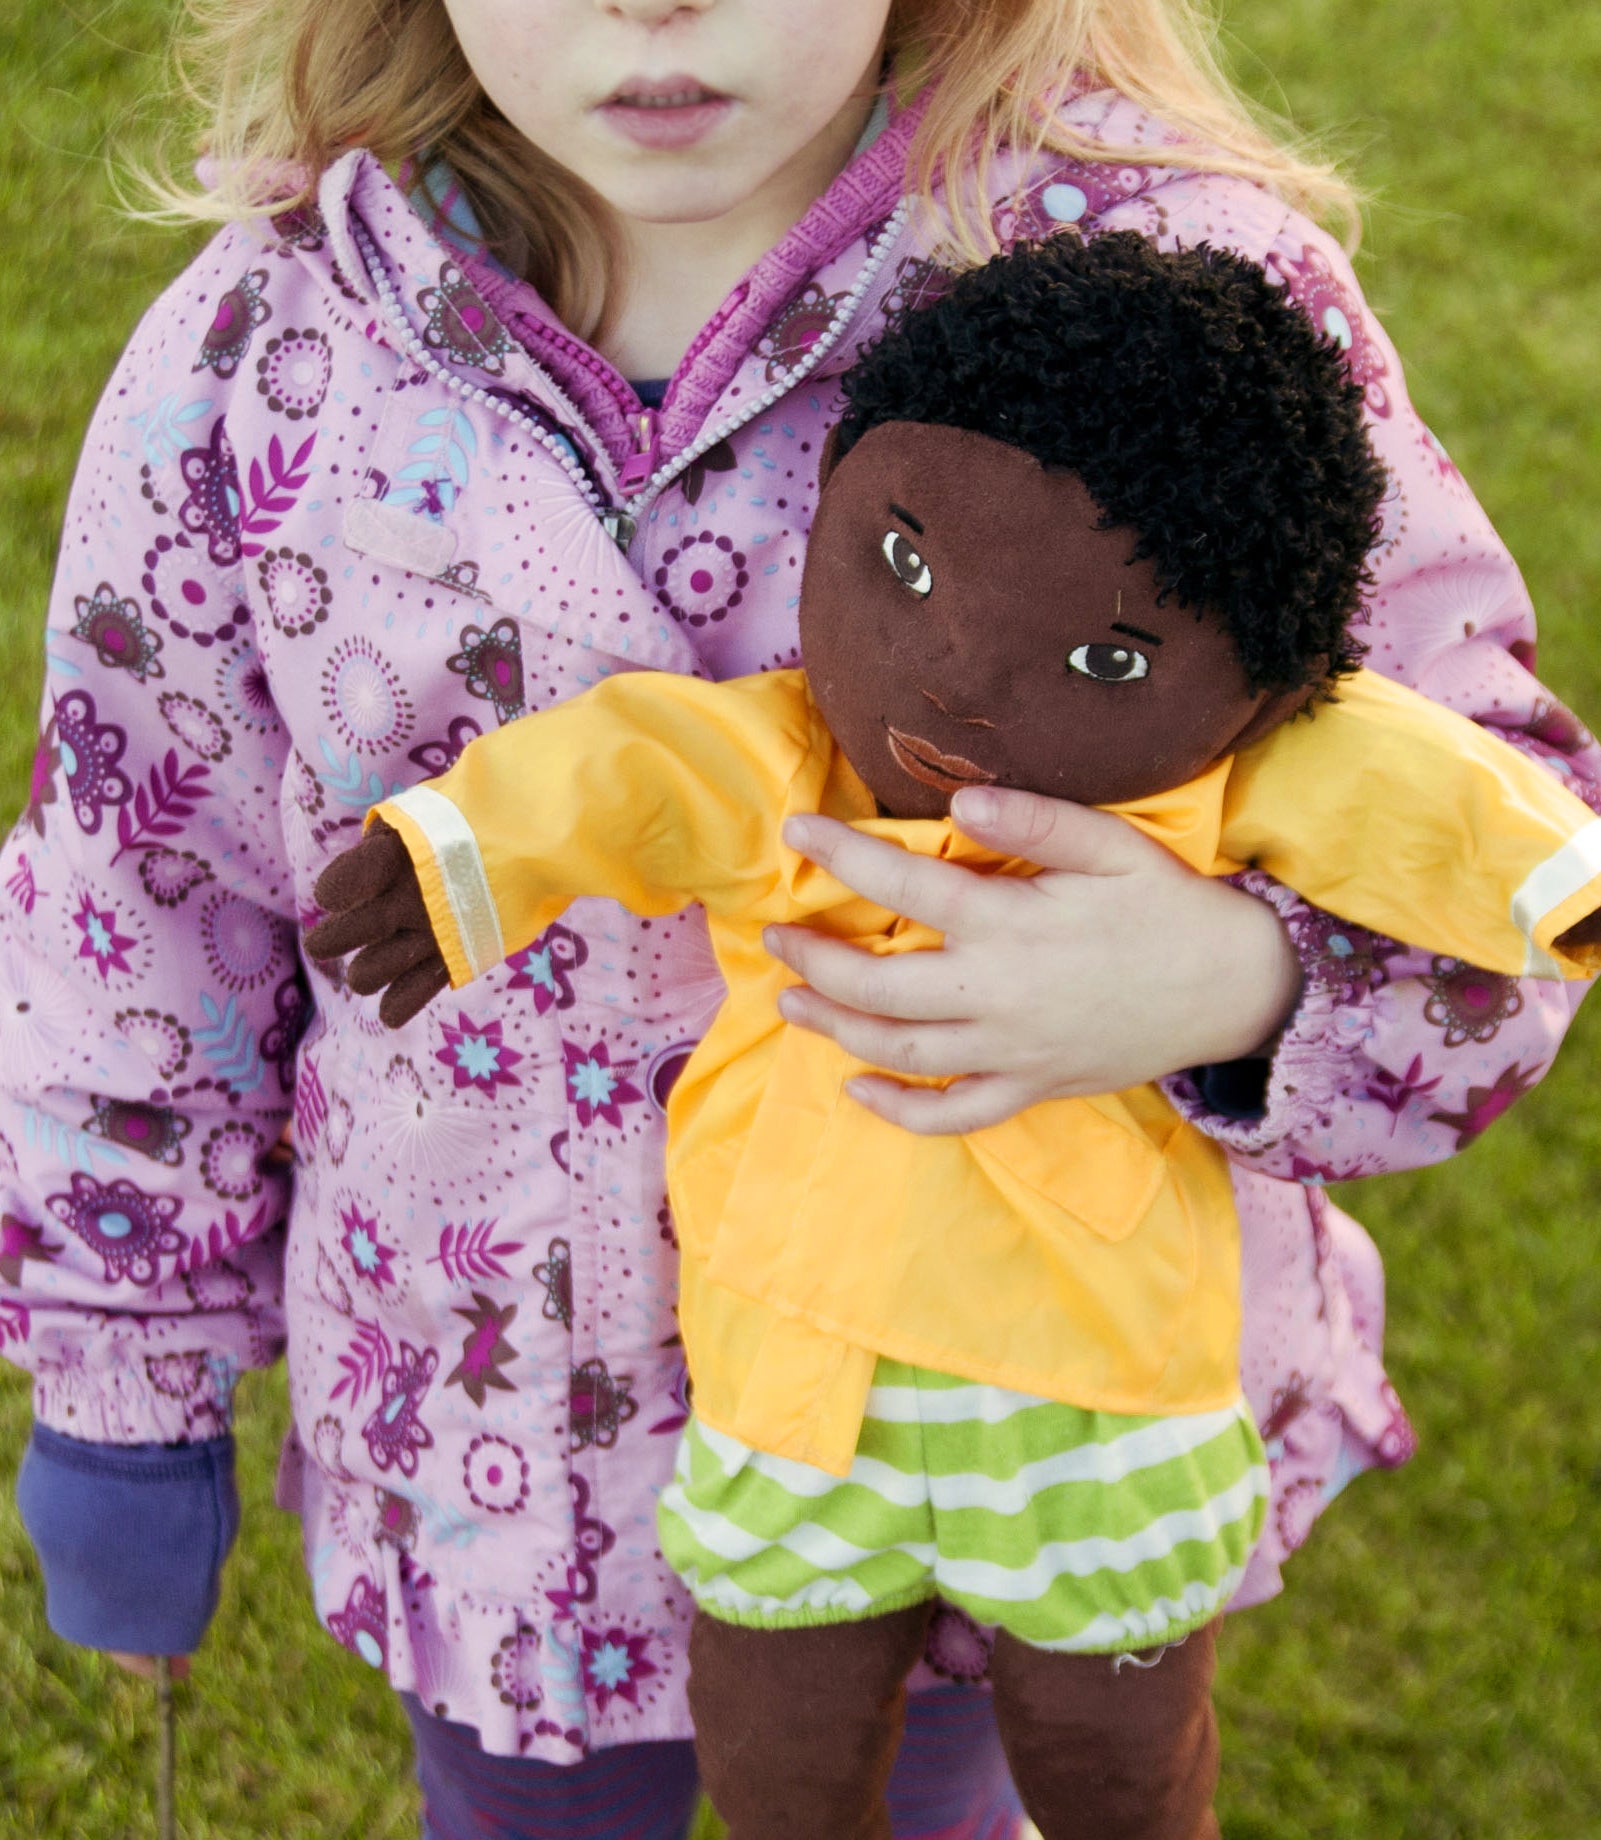 Receiving Black Dolls For Christmas Brought Two Young Girls To Tears
